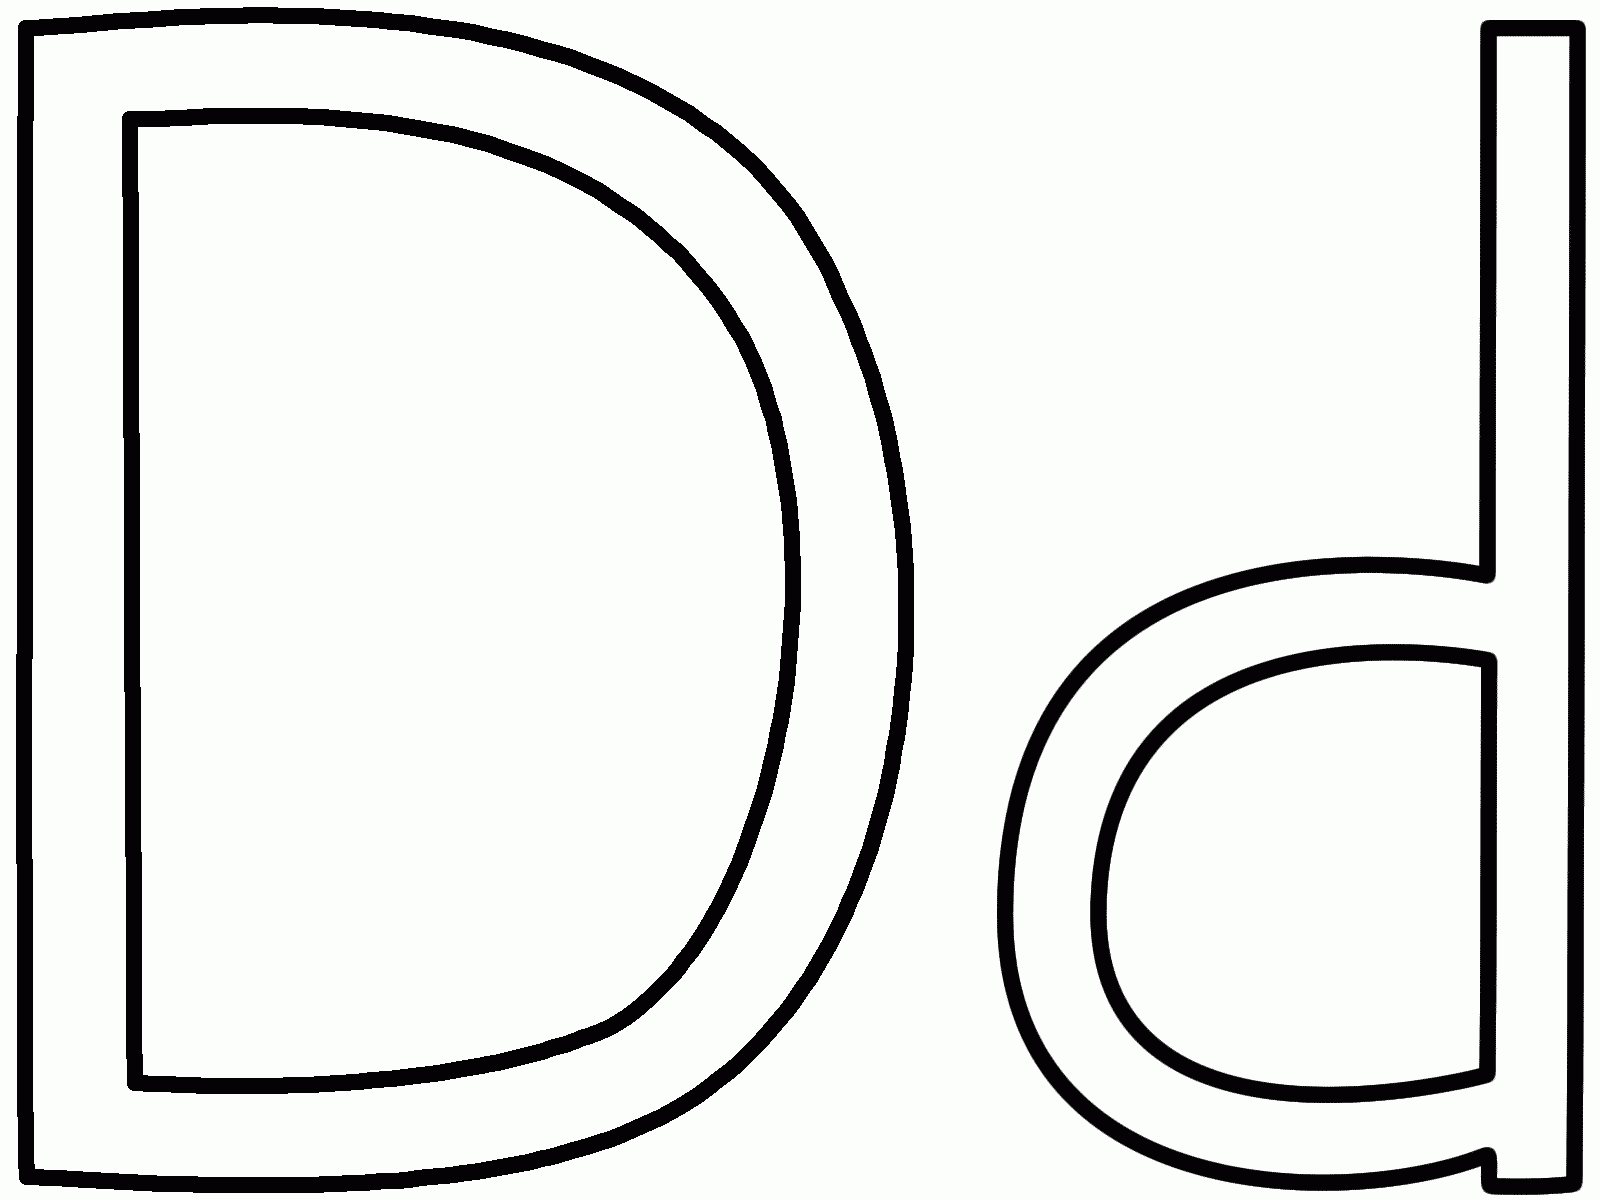 Free Printable Letter D Coloring Pages, Download Free Clip with regard to Letter D Worksheets Free